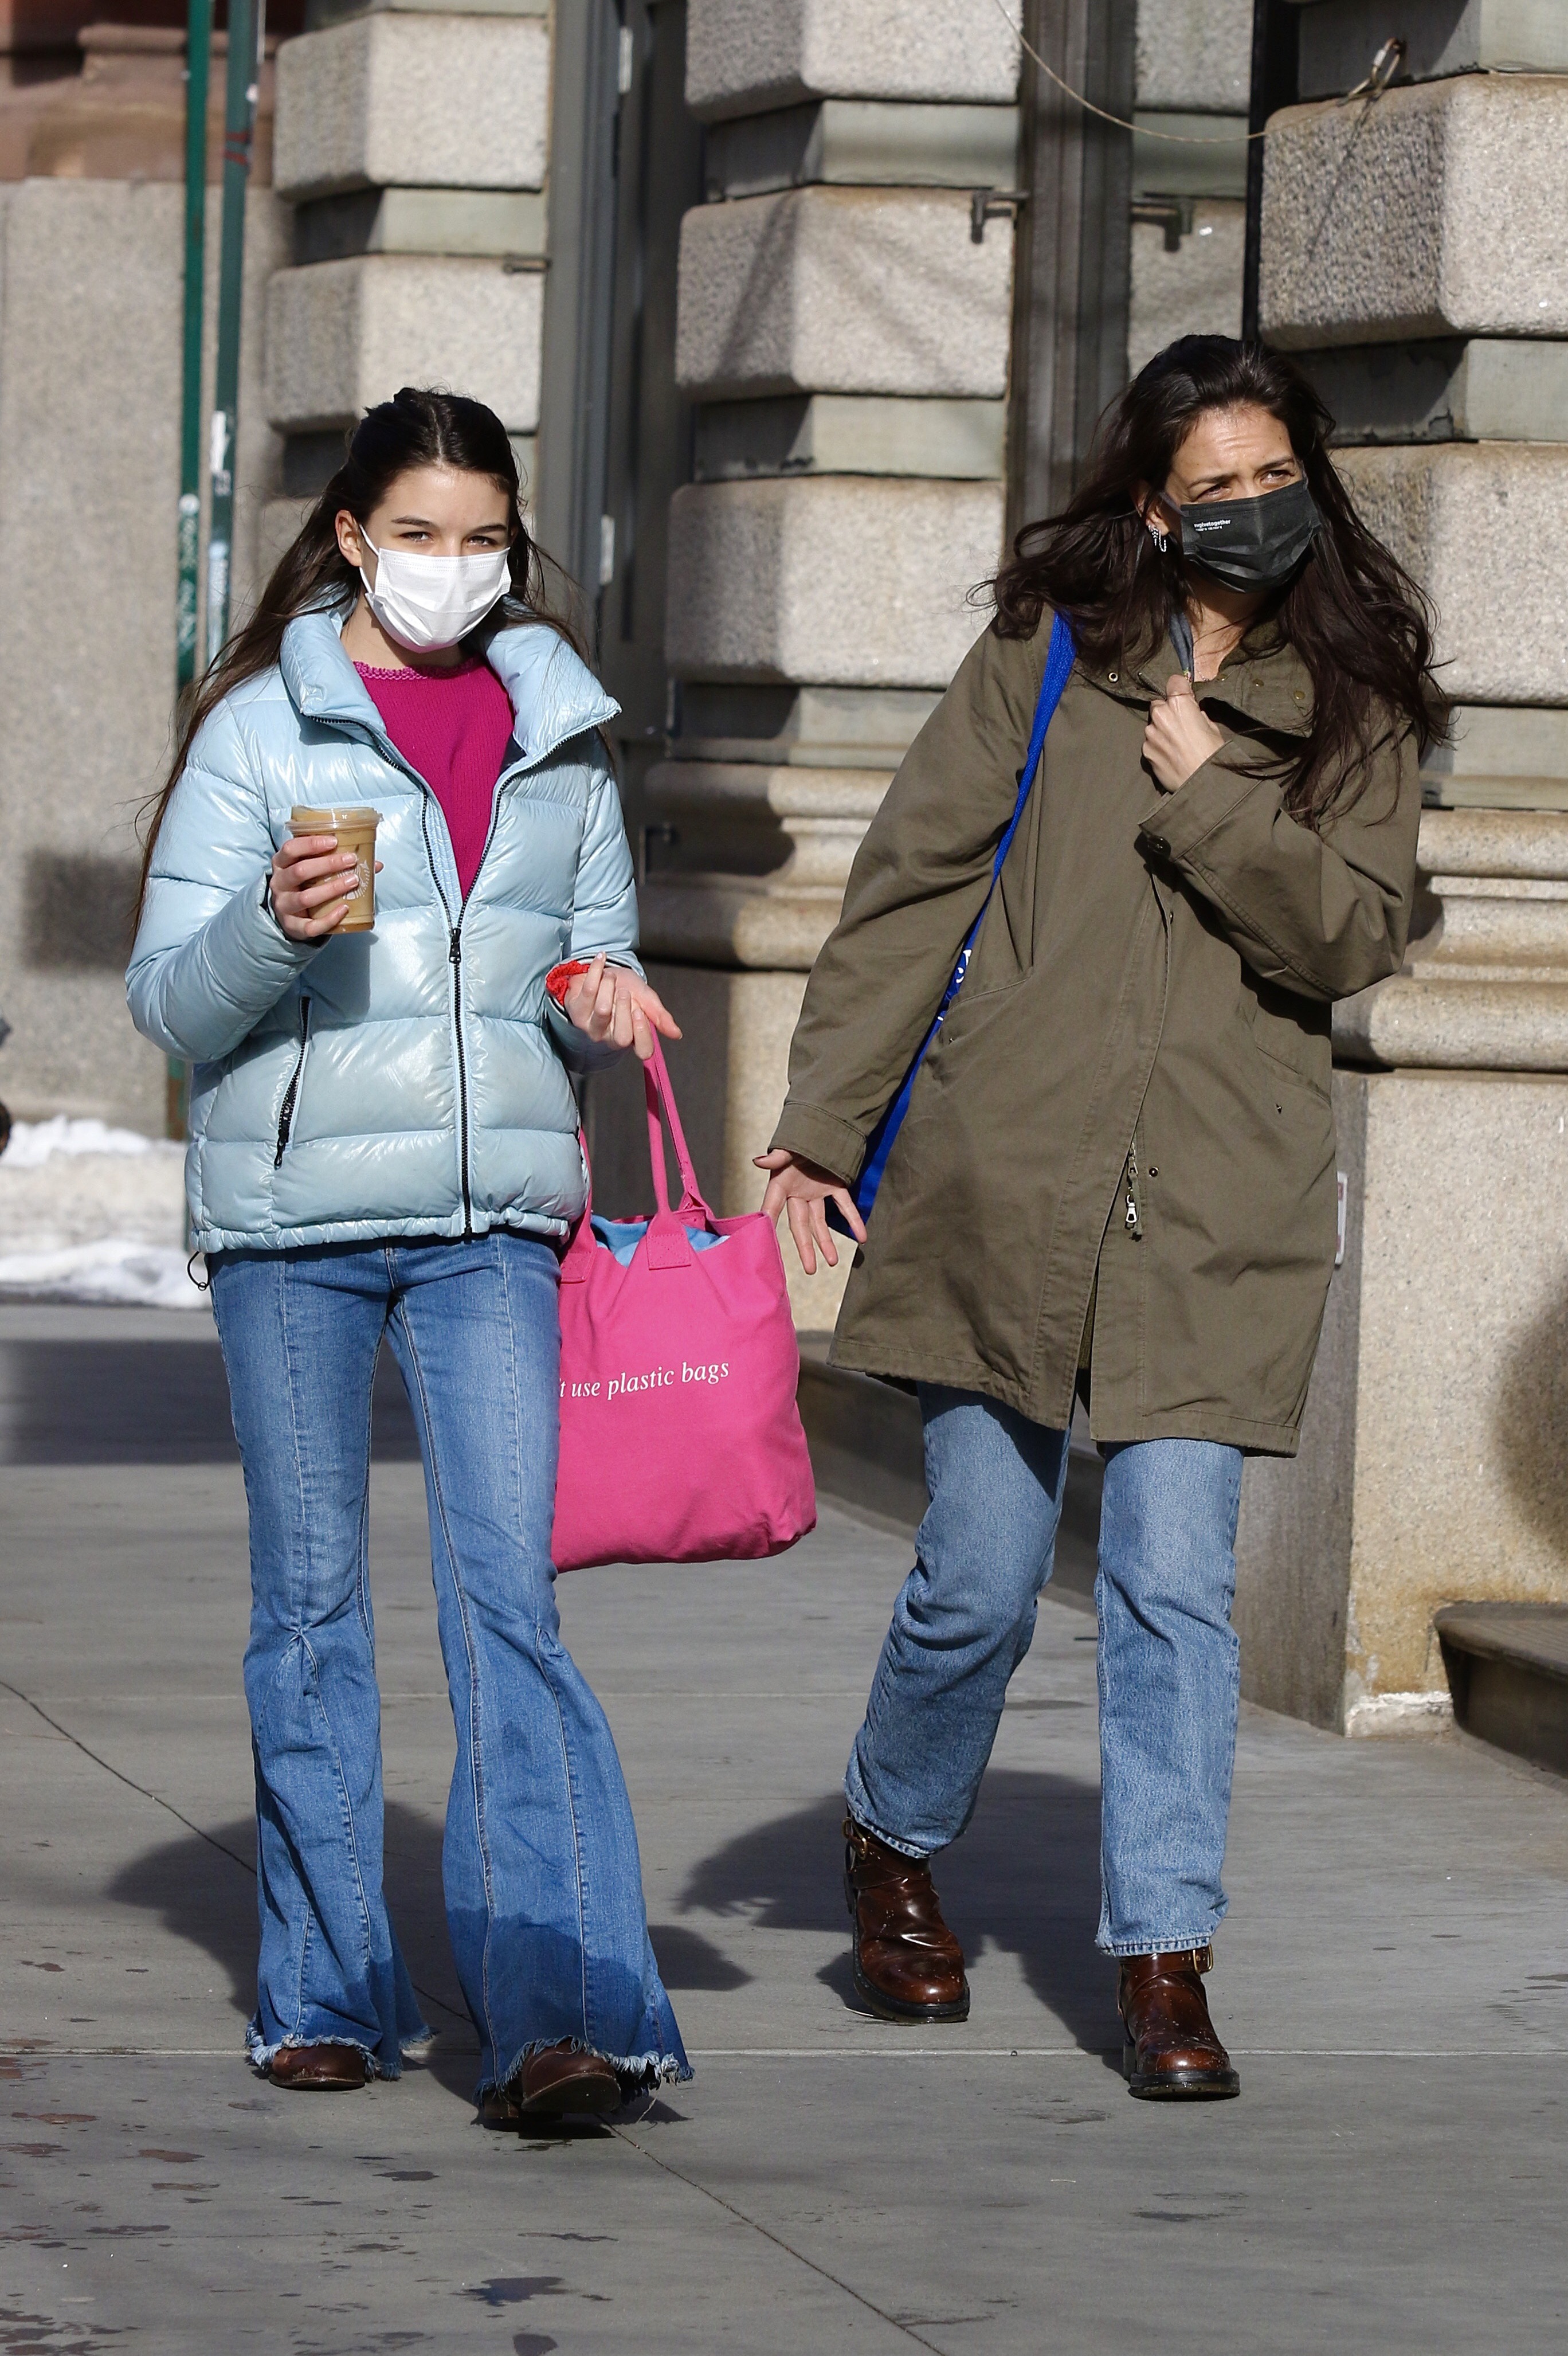 Katie Holmes and Suri Cruise out for a walk on February 6, 2021 in New York City. | Source: Getty Images